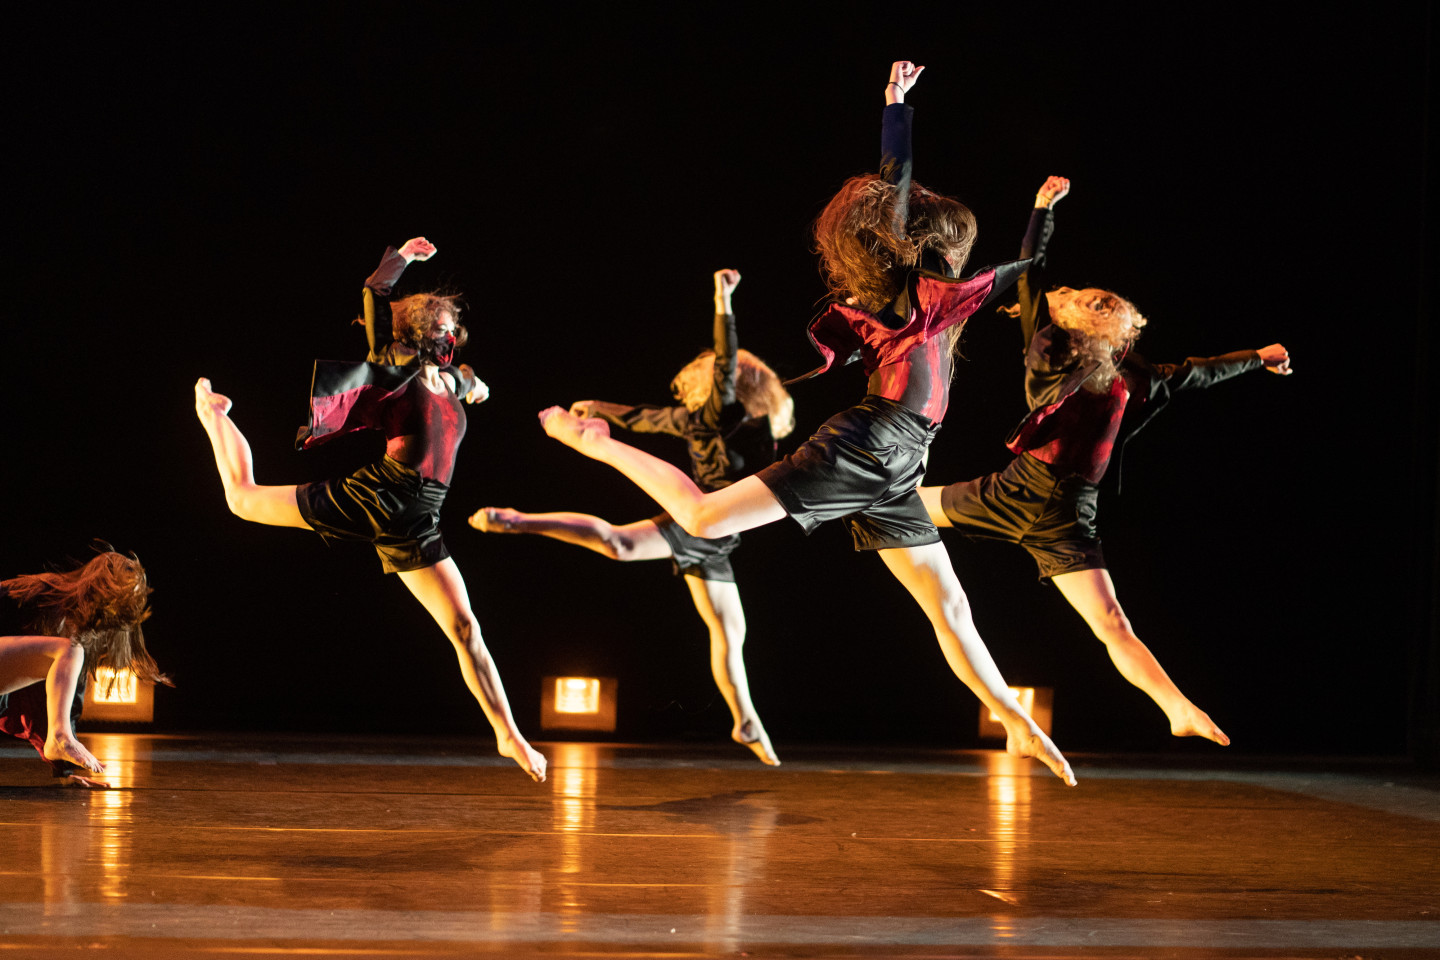 Dancers perform on stage.